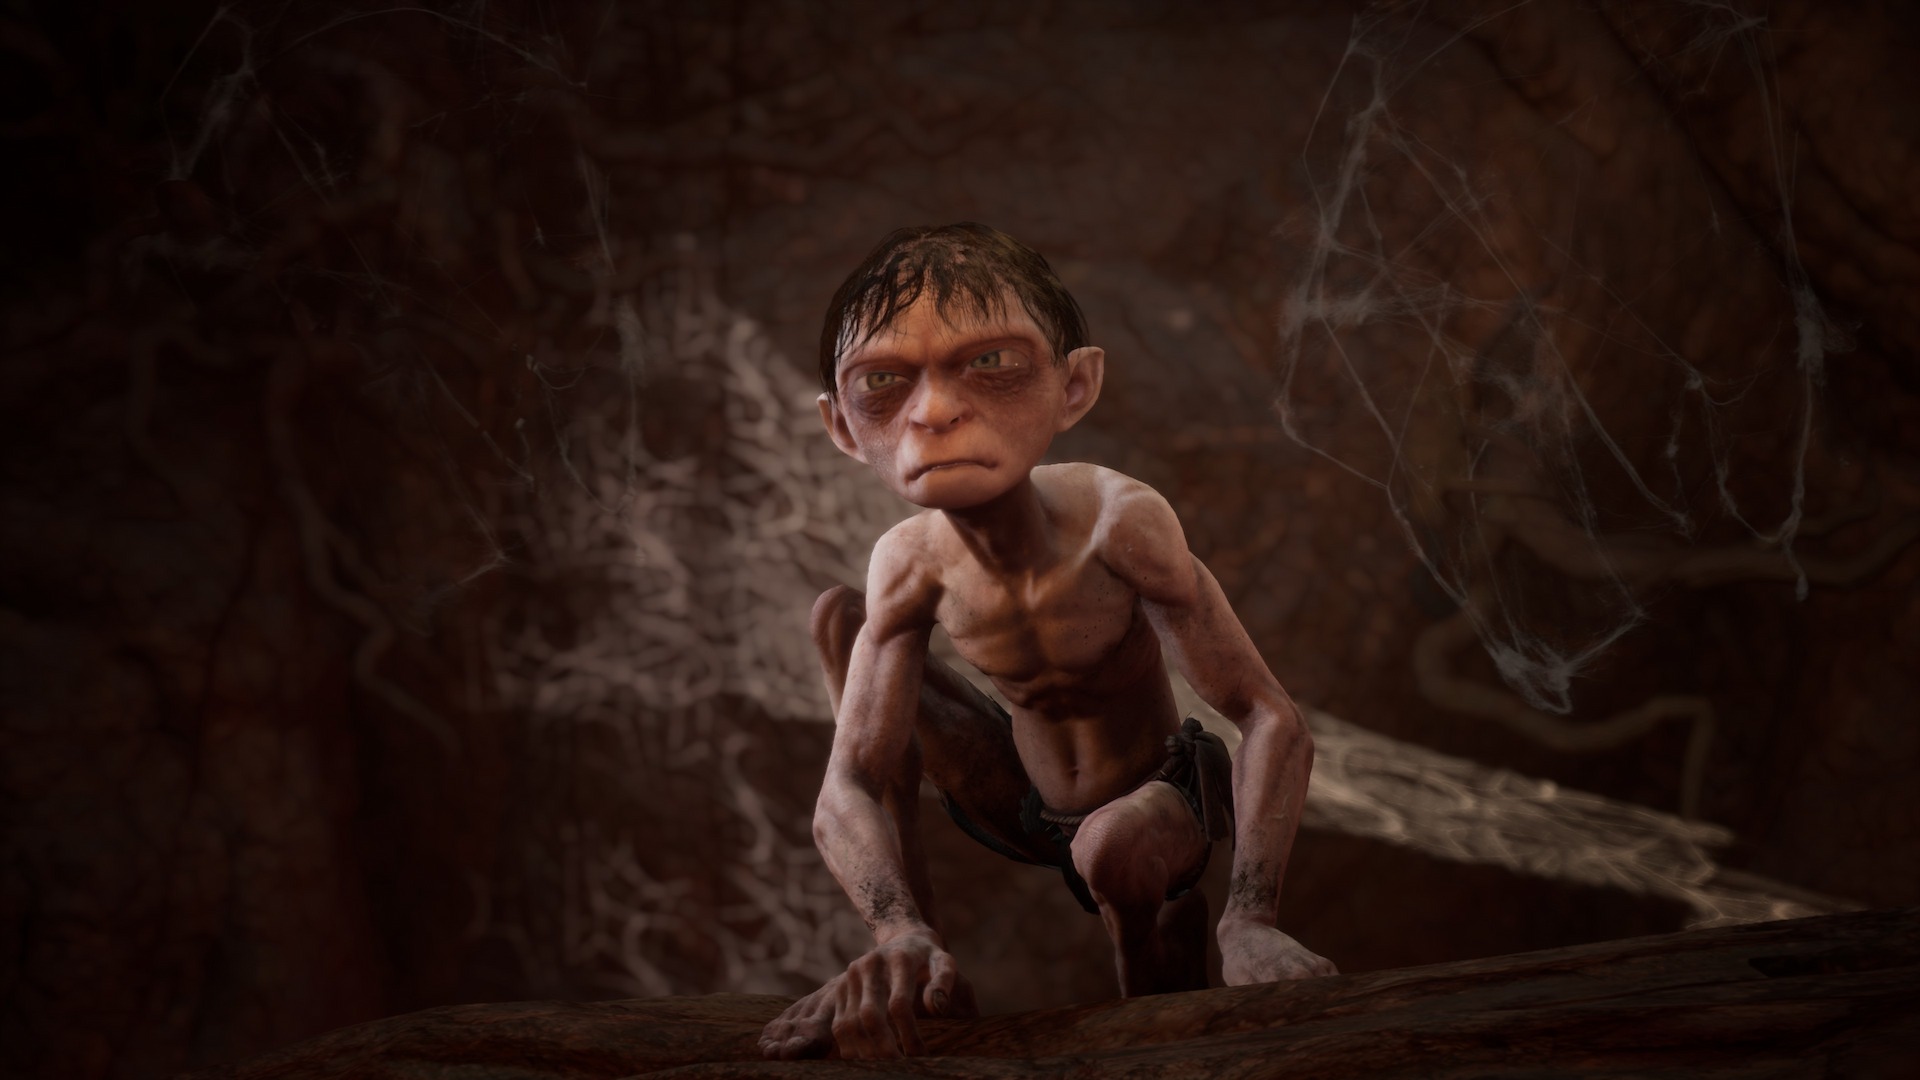 The Lord of the Rings: Gollum review - Sauwrong